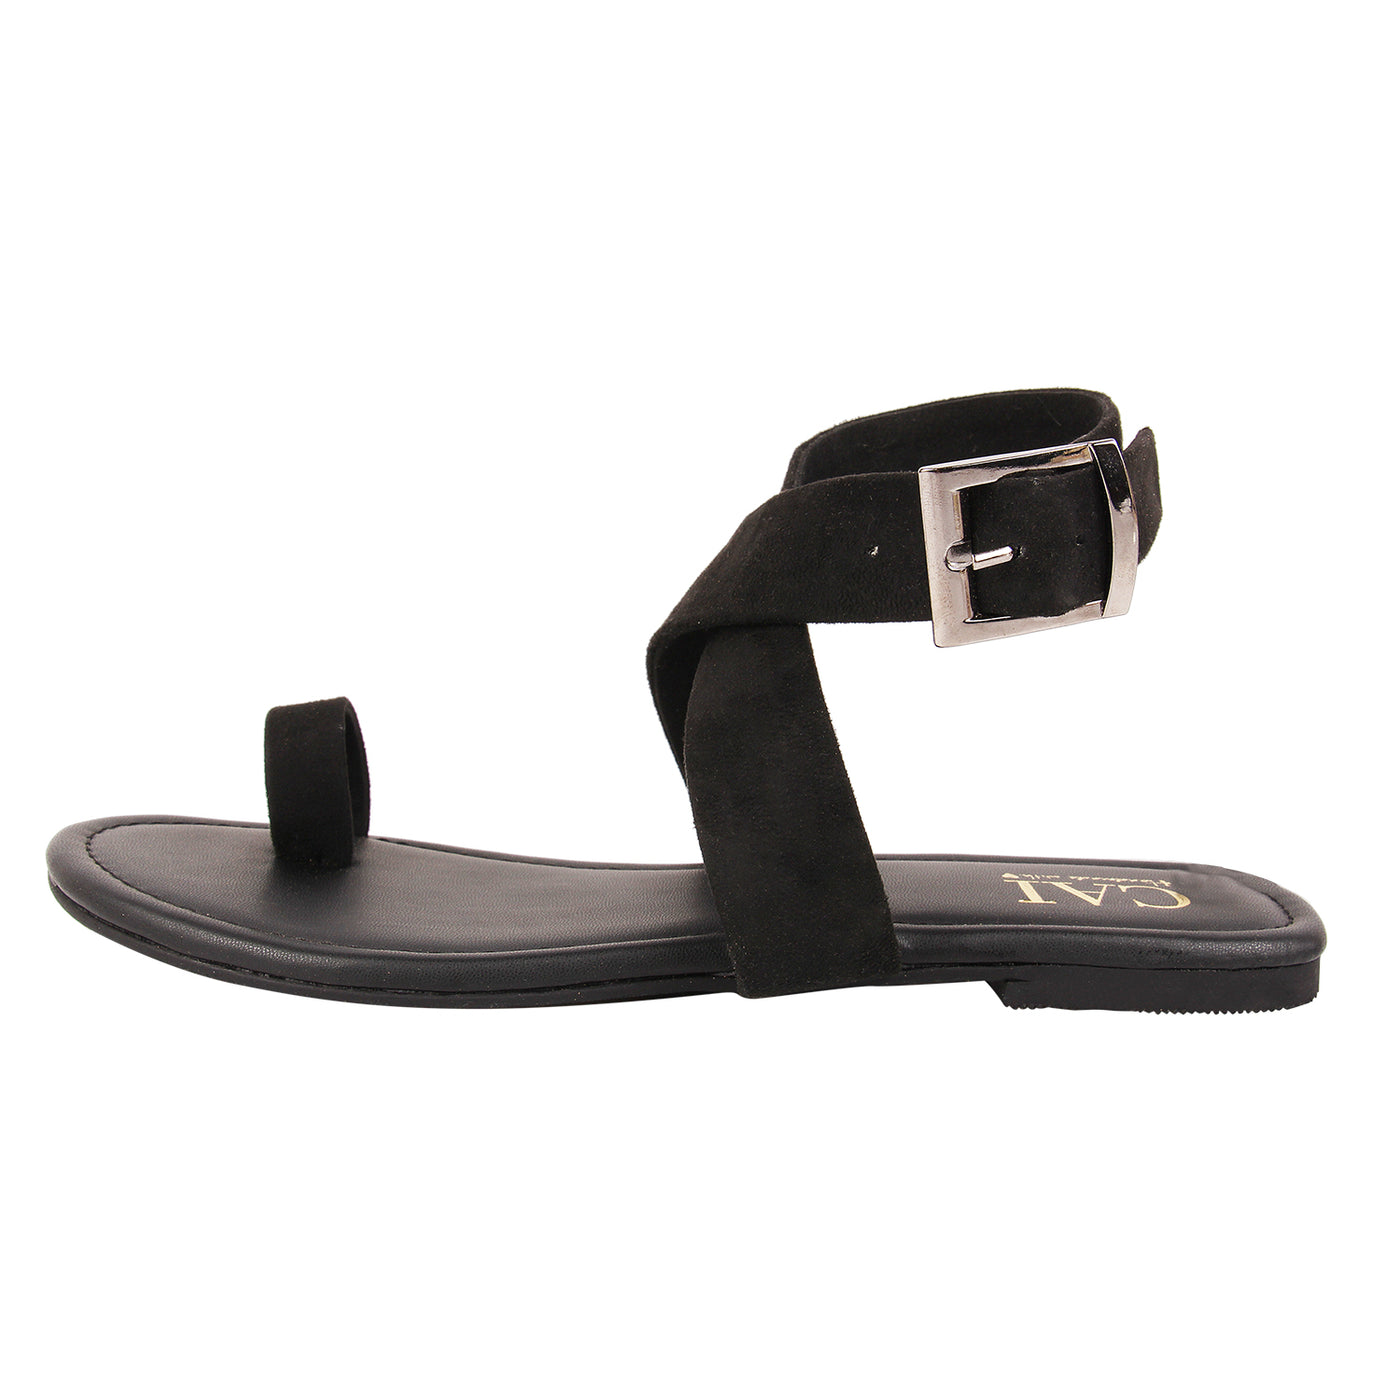 Buy Stylish Sandals At Best Deals Online From